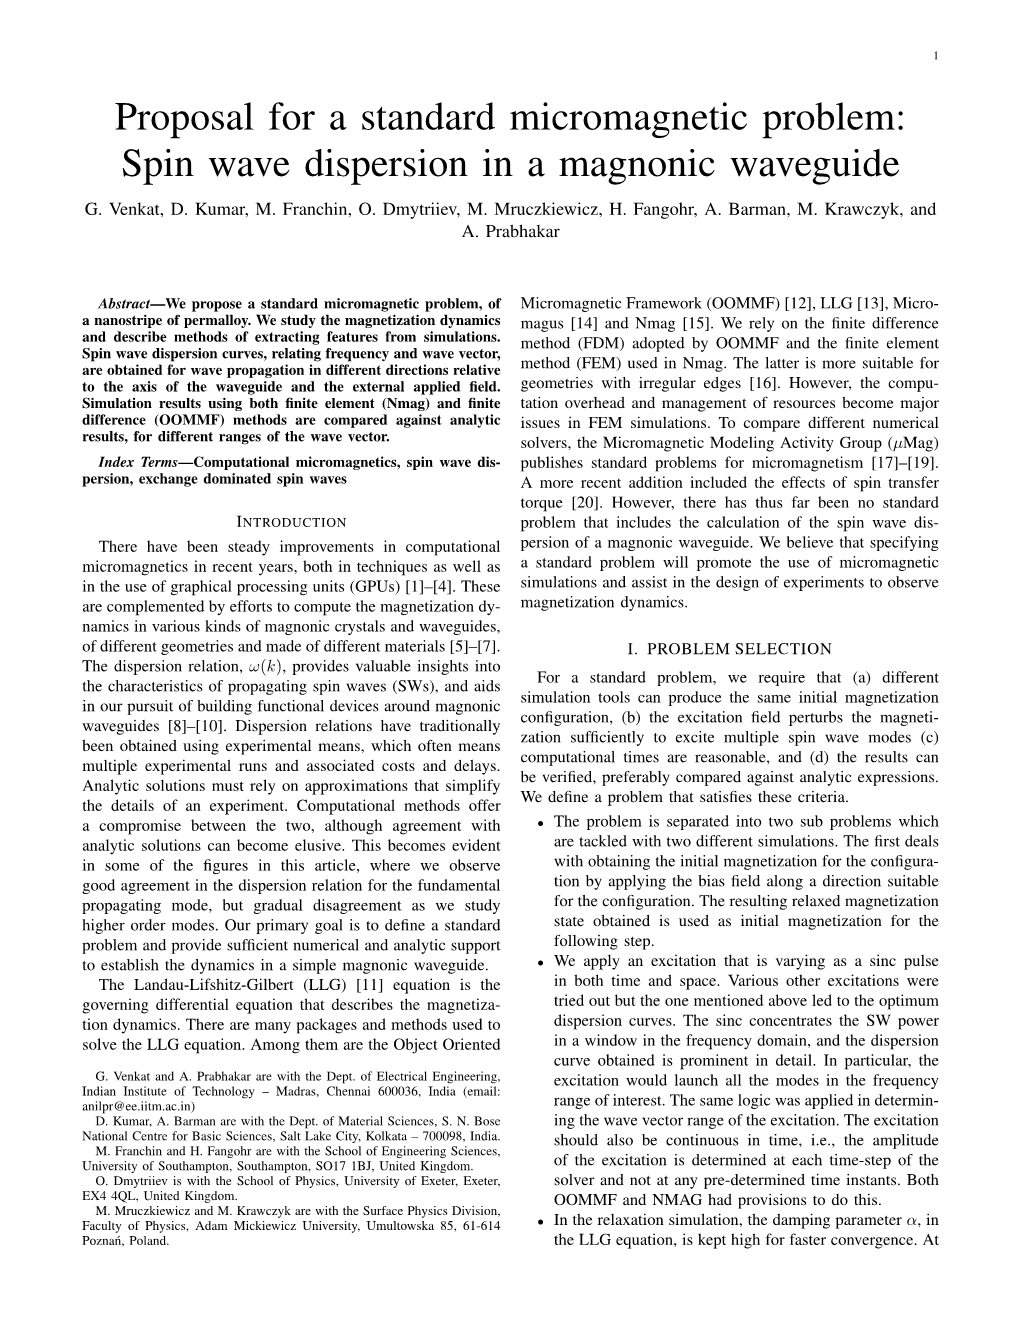 Spin Wave Dispersion in a Magnonic Waveguide G